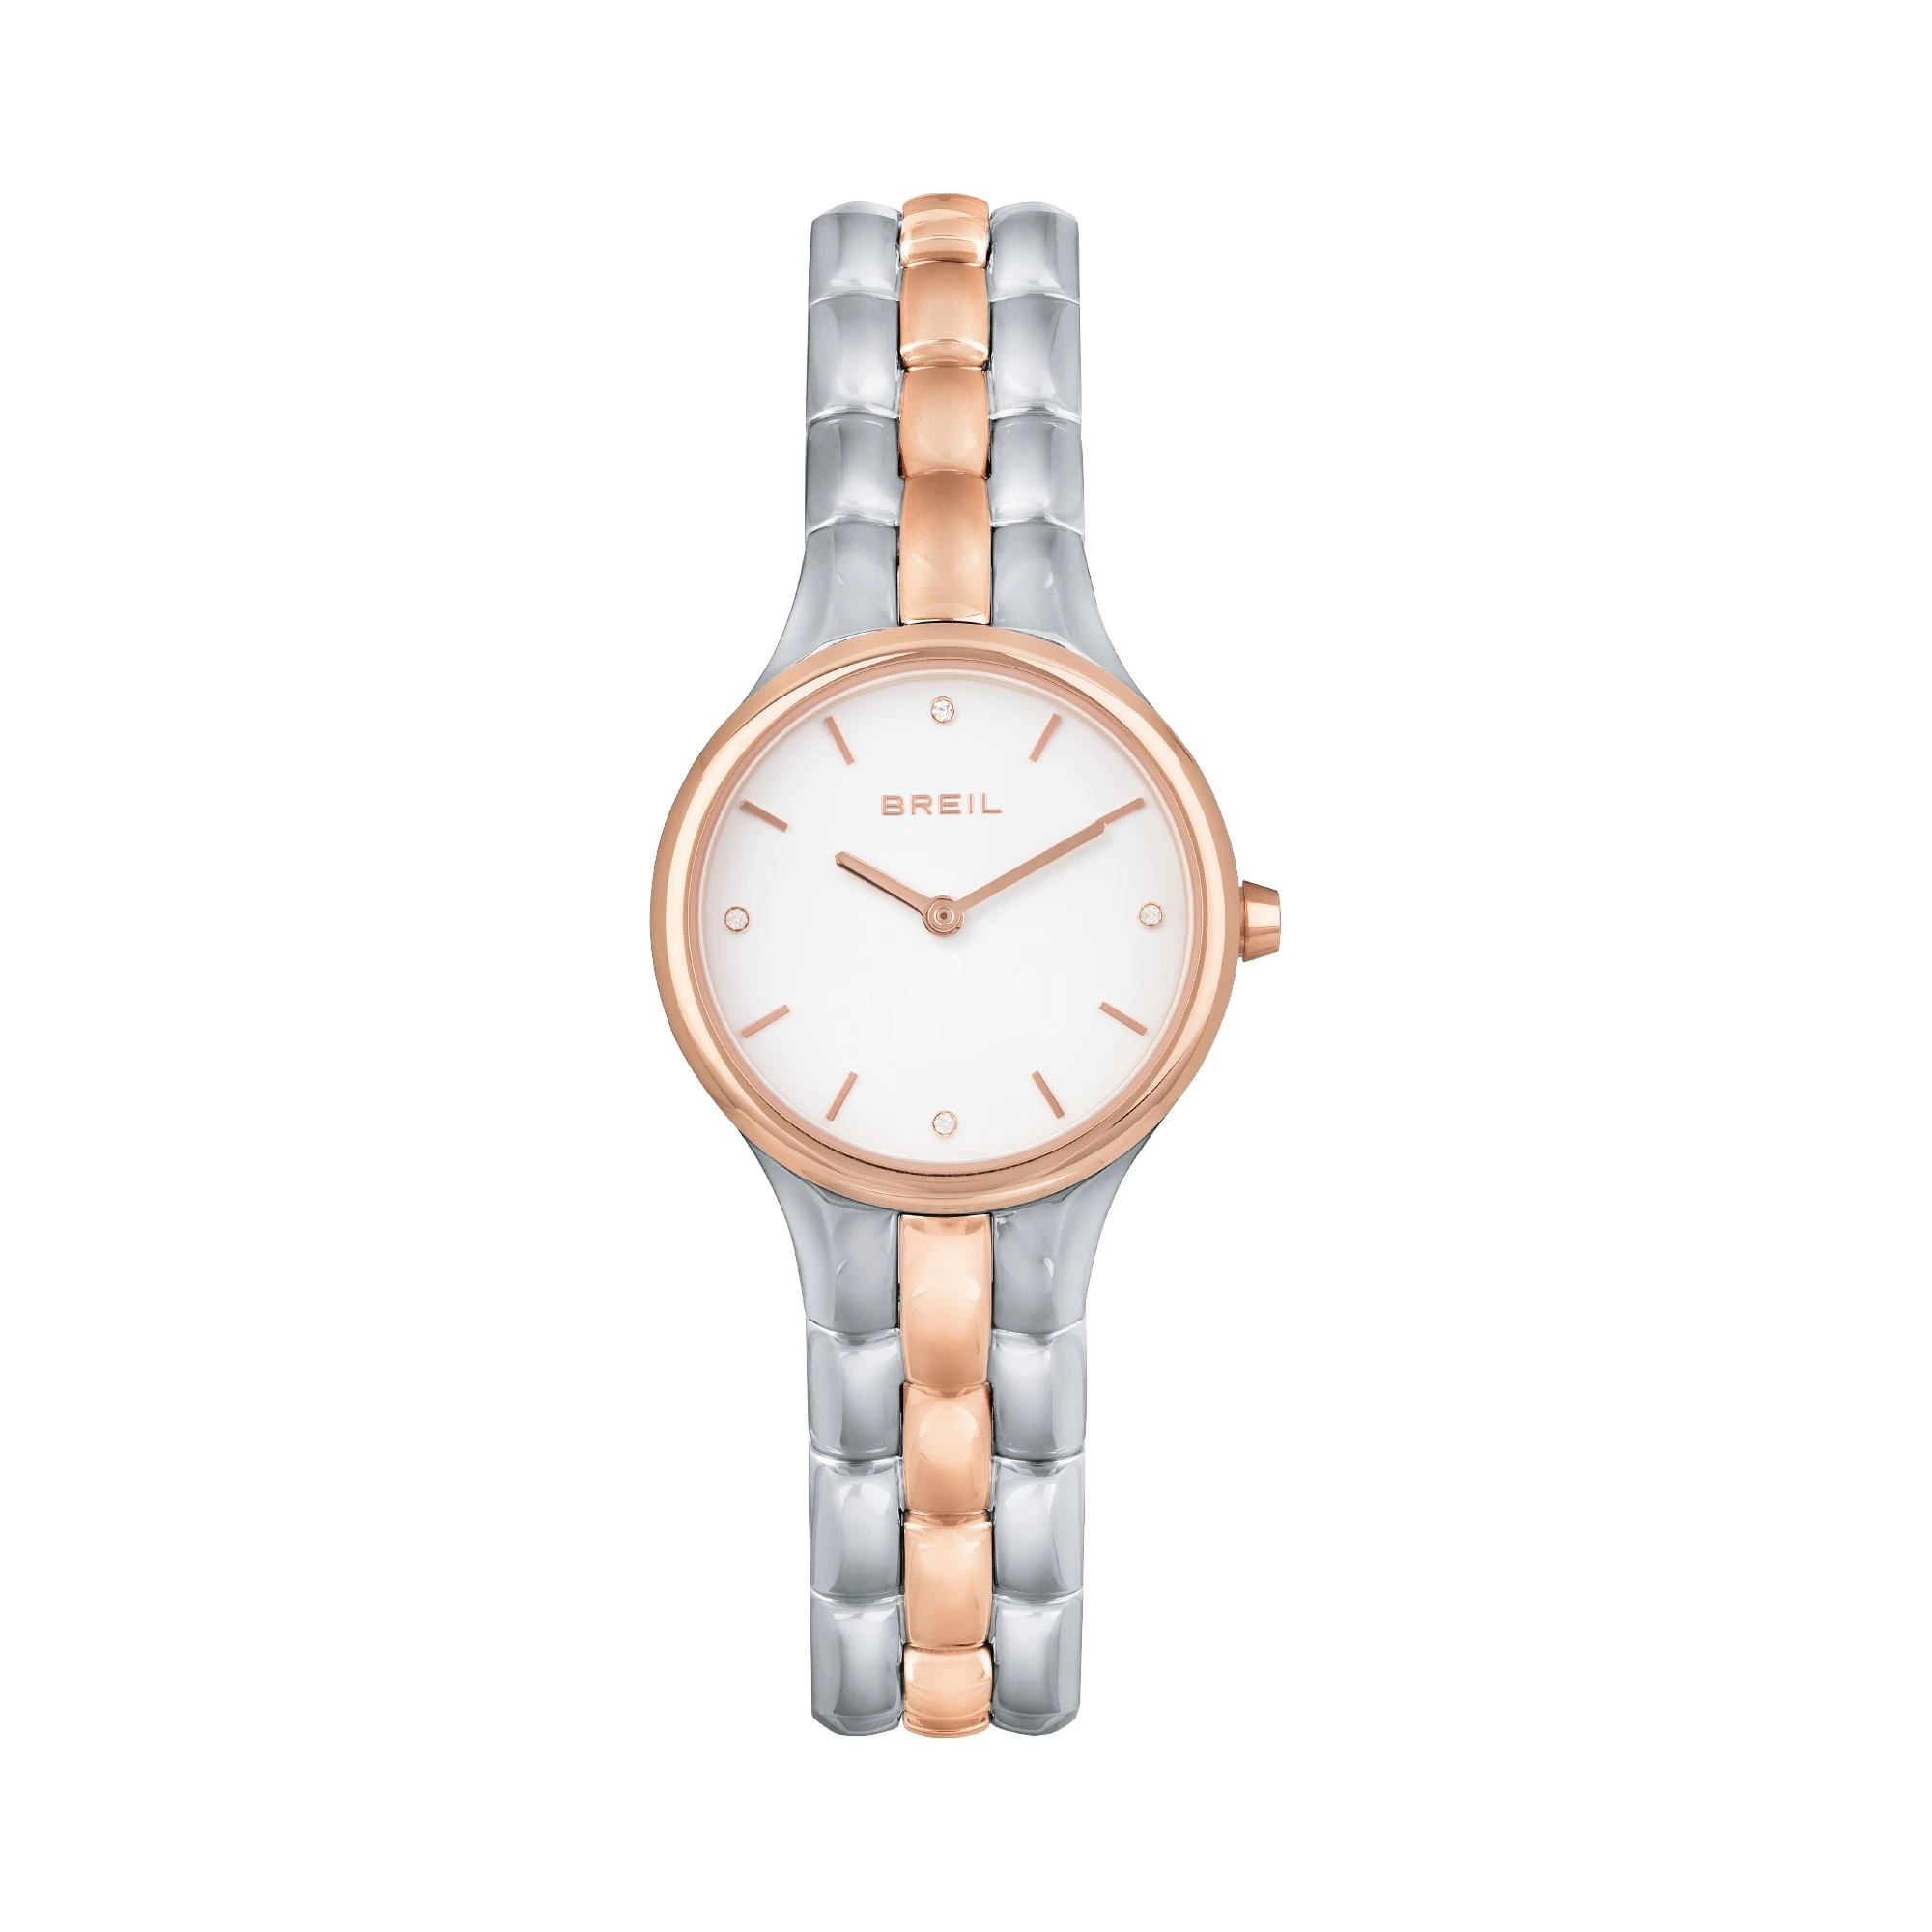 IVY - TIME ONLY LADY 26 MM - 1 - TW1888 | Breil